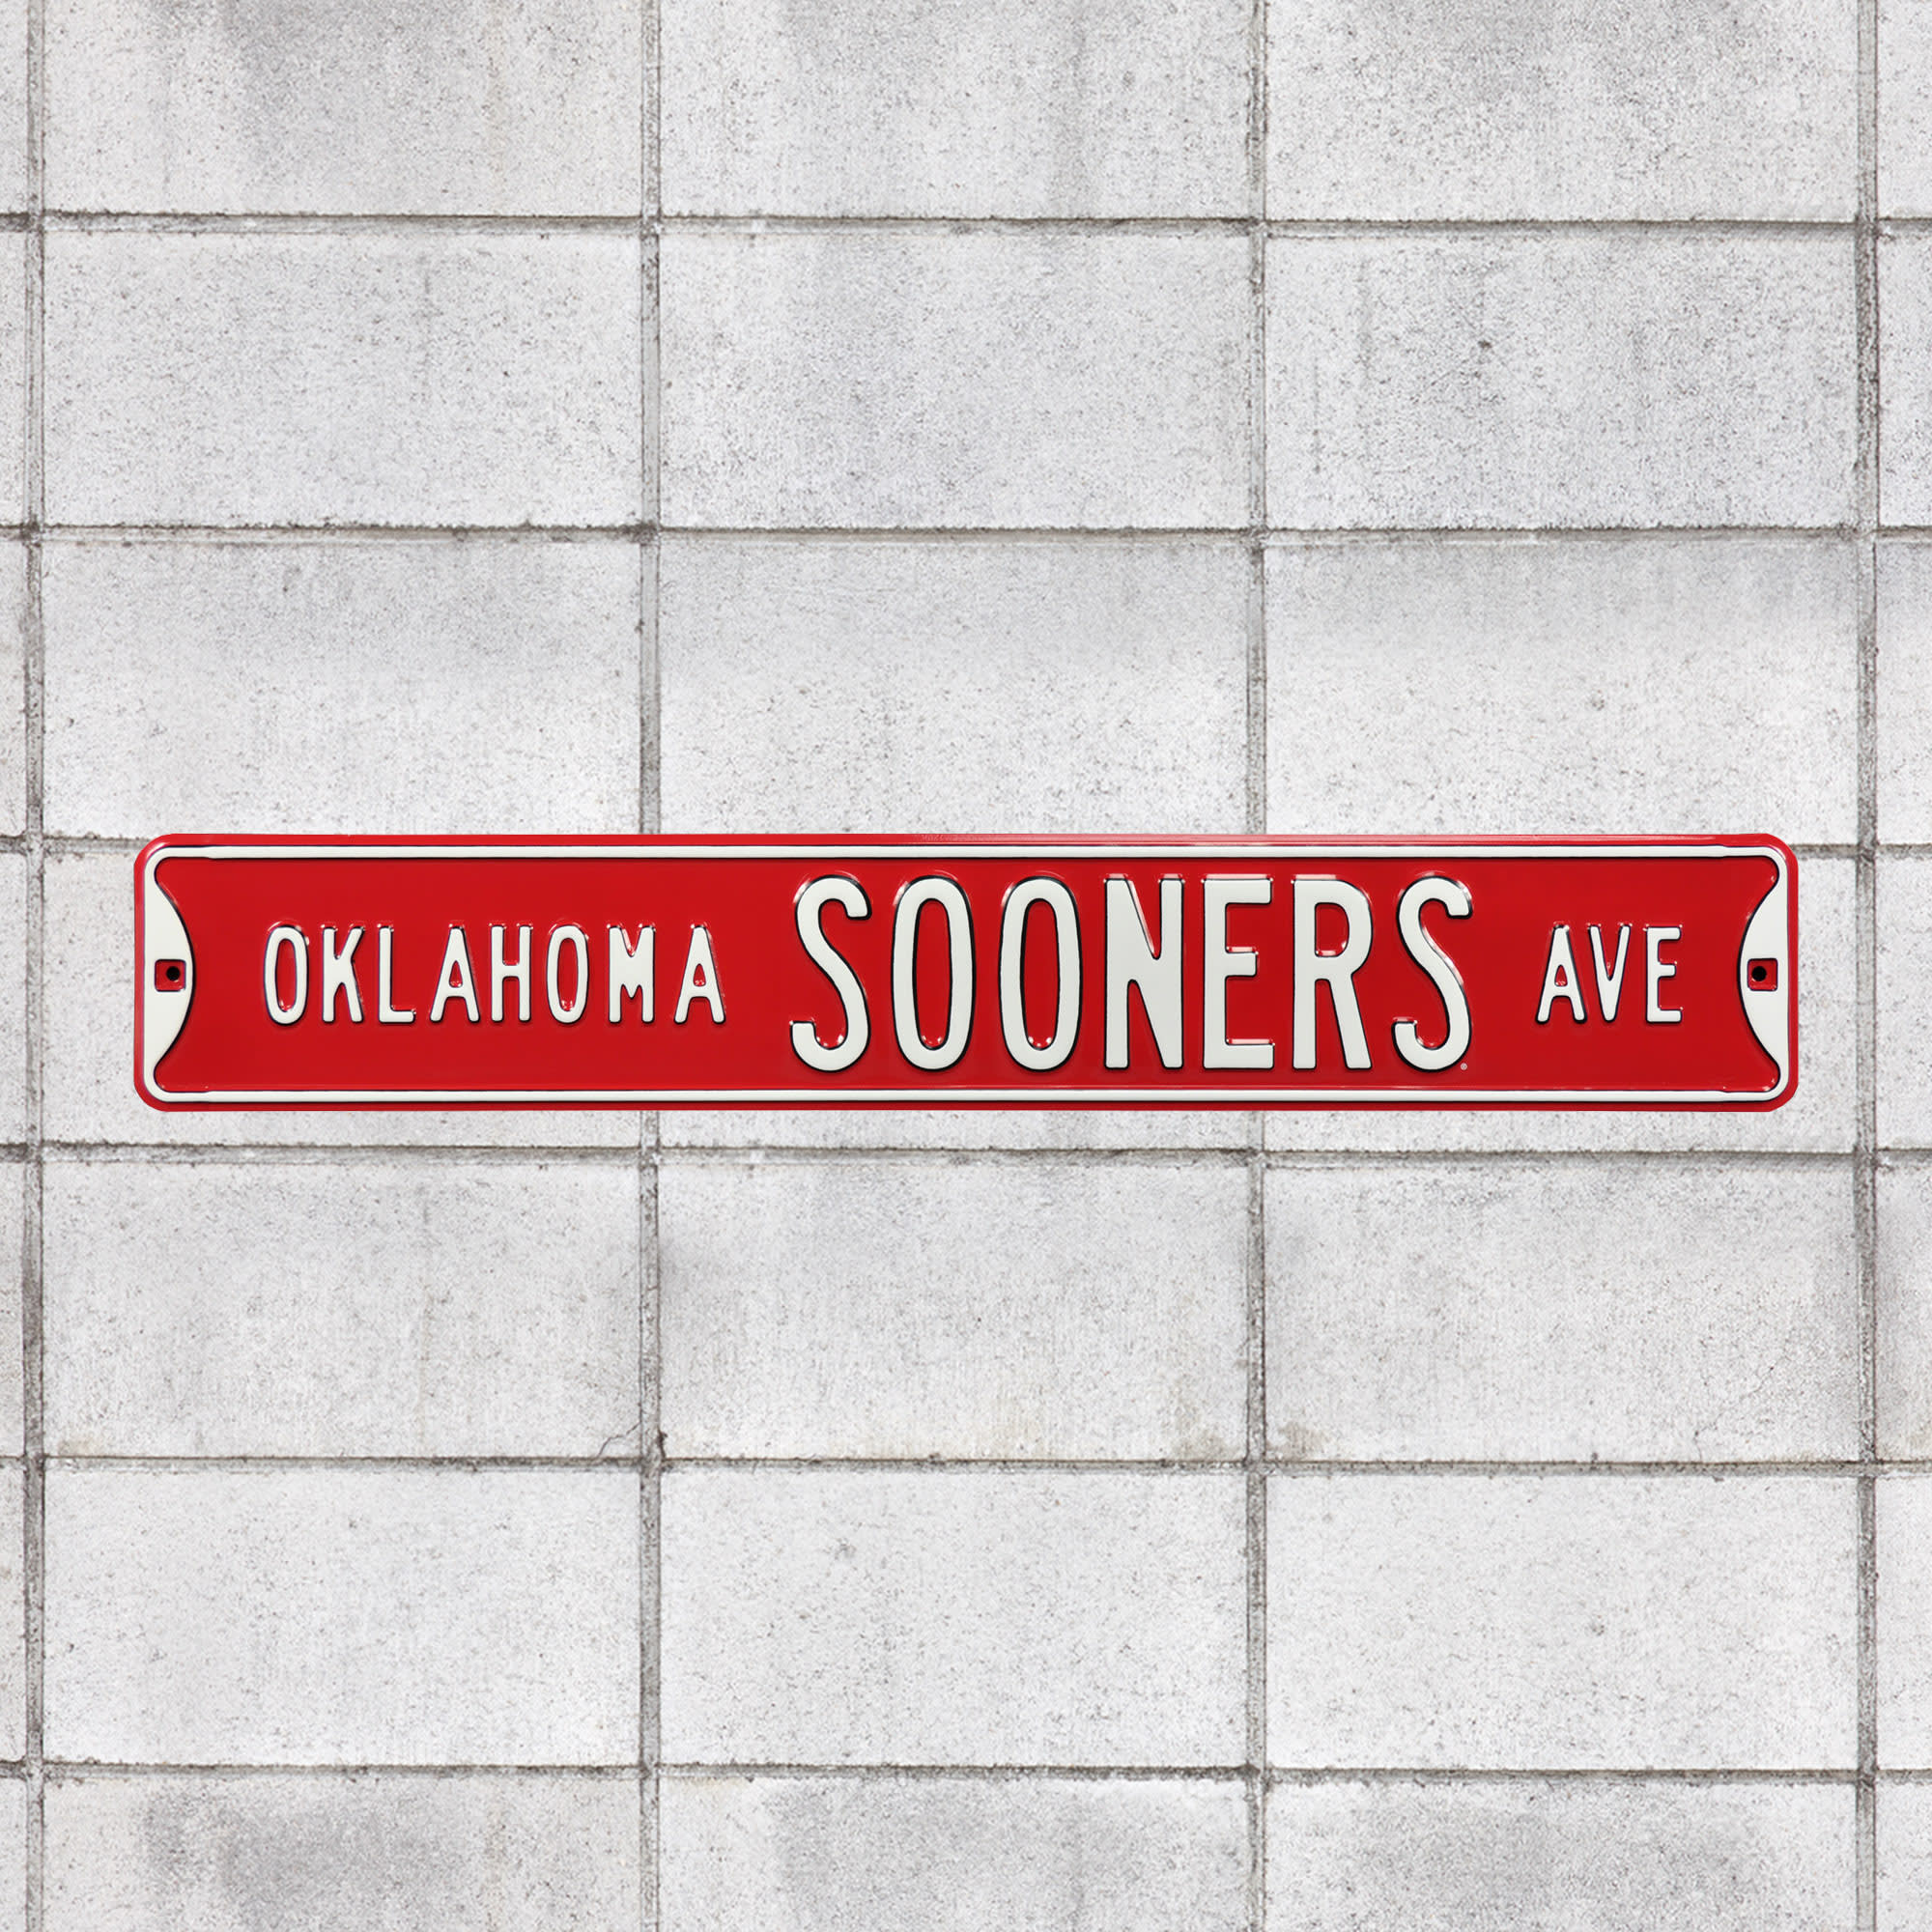 Oklahoma Sooners: Oklahoma Sooners Avenue - Officially Licensed Metal Street Sign 36.0"W x 6.0"H by Fathead | 100% Steel